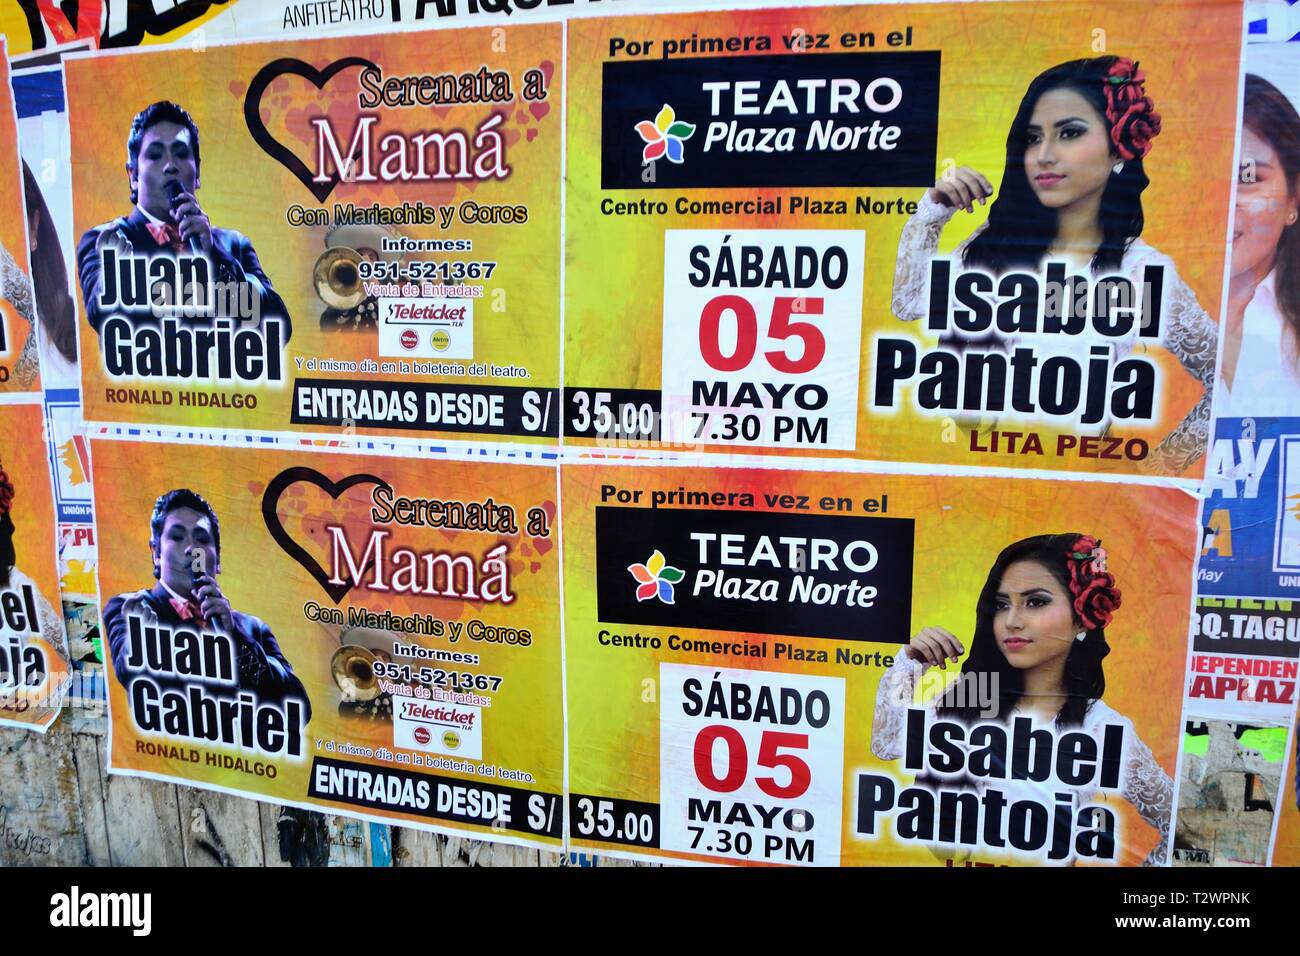 Poster of imitators of famous singers - theater Plaza Norte  in LIMA. Department of Lima.PERU      											  					  			 	  	  			 	    	 Stock Photo